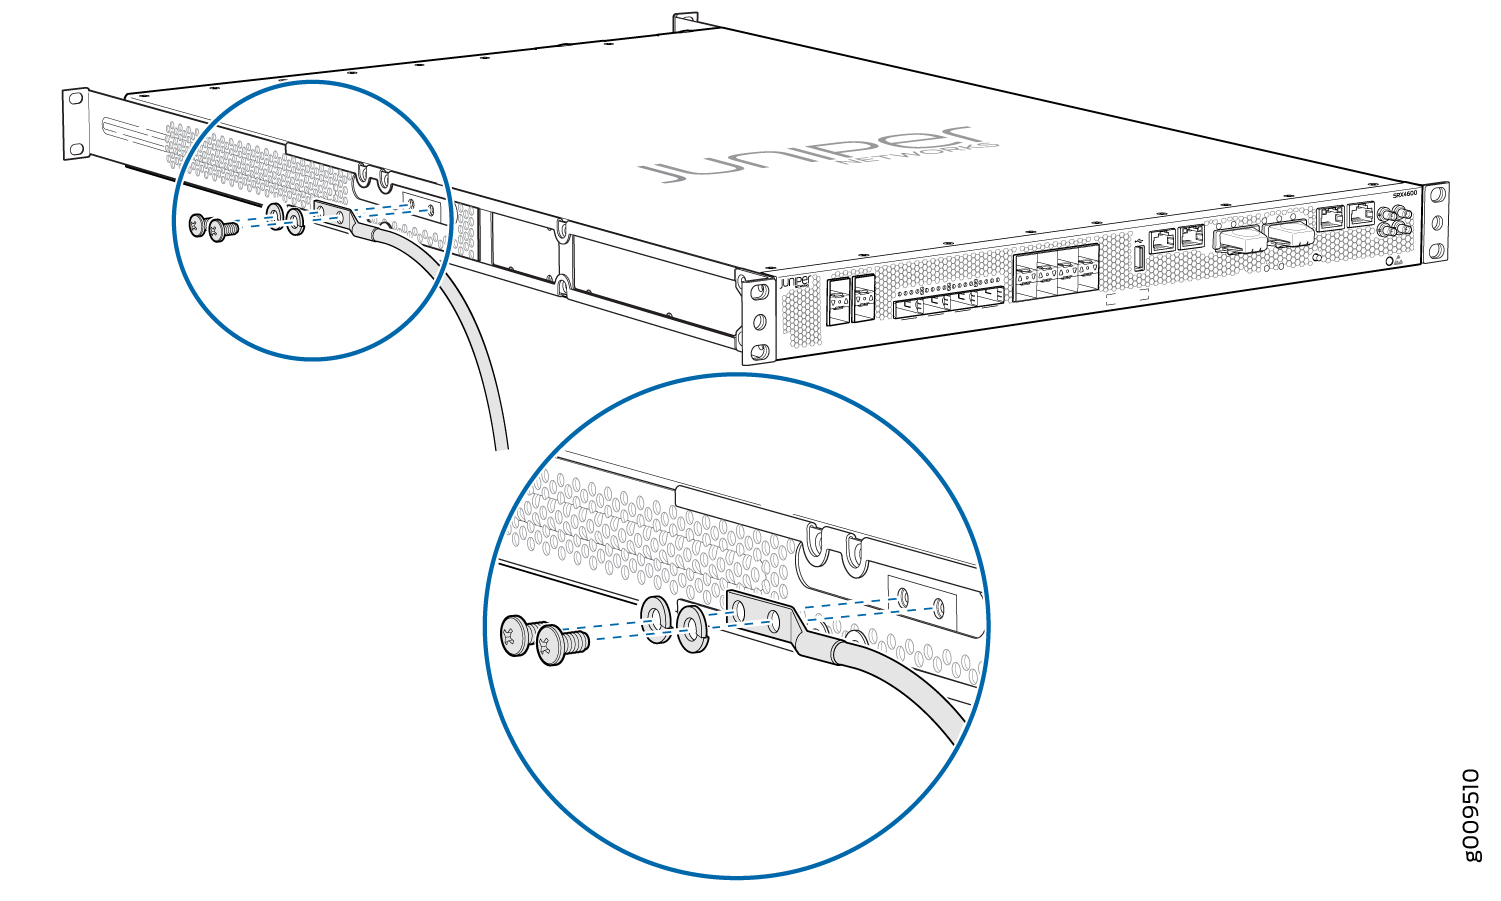 Connecting a Grounding Cable to an SRX4600 Firewall